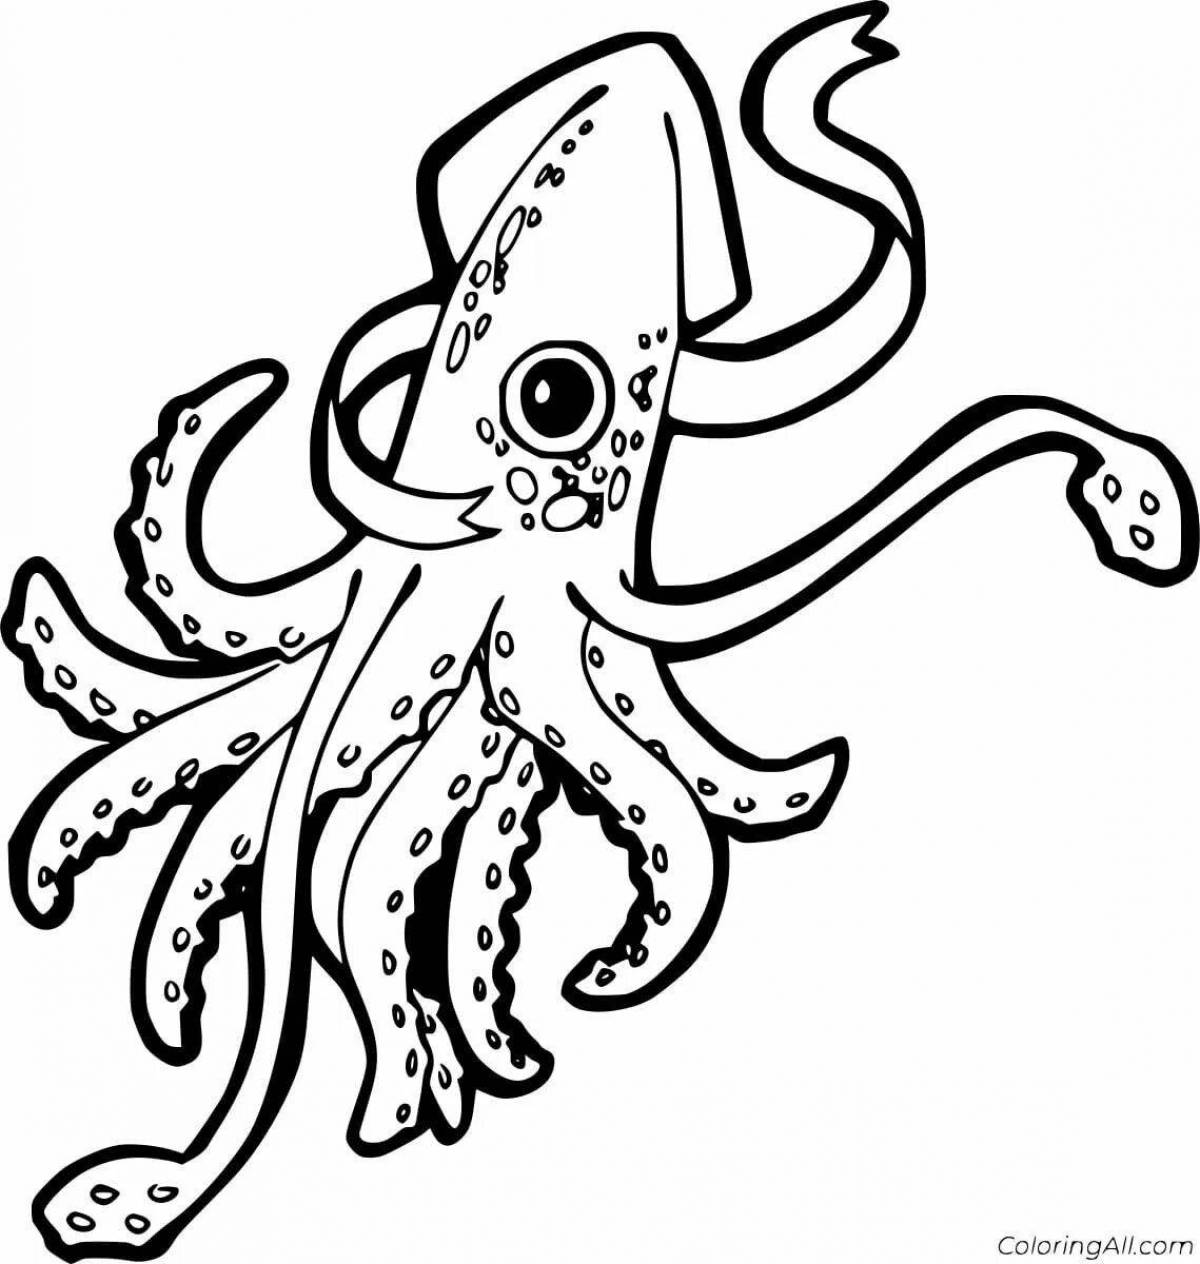 Awesome cuttlefish coloring page